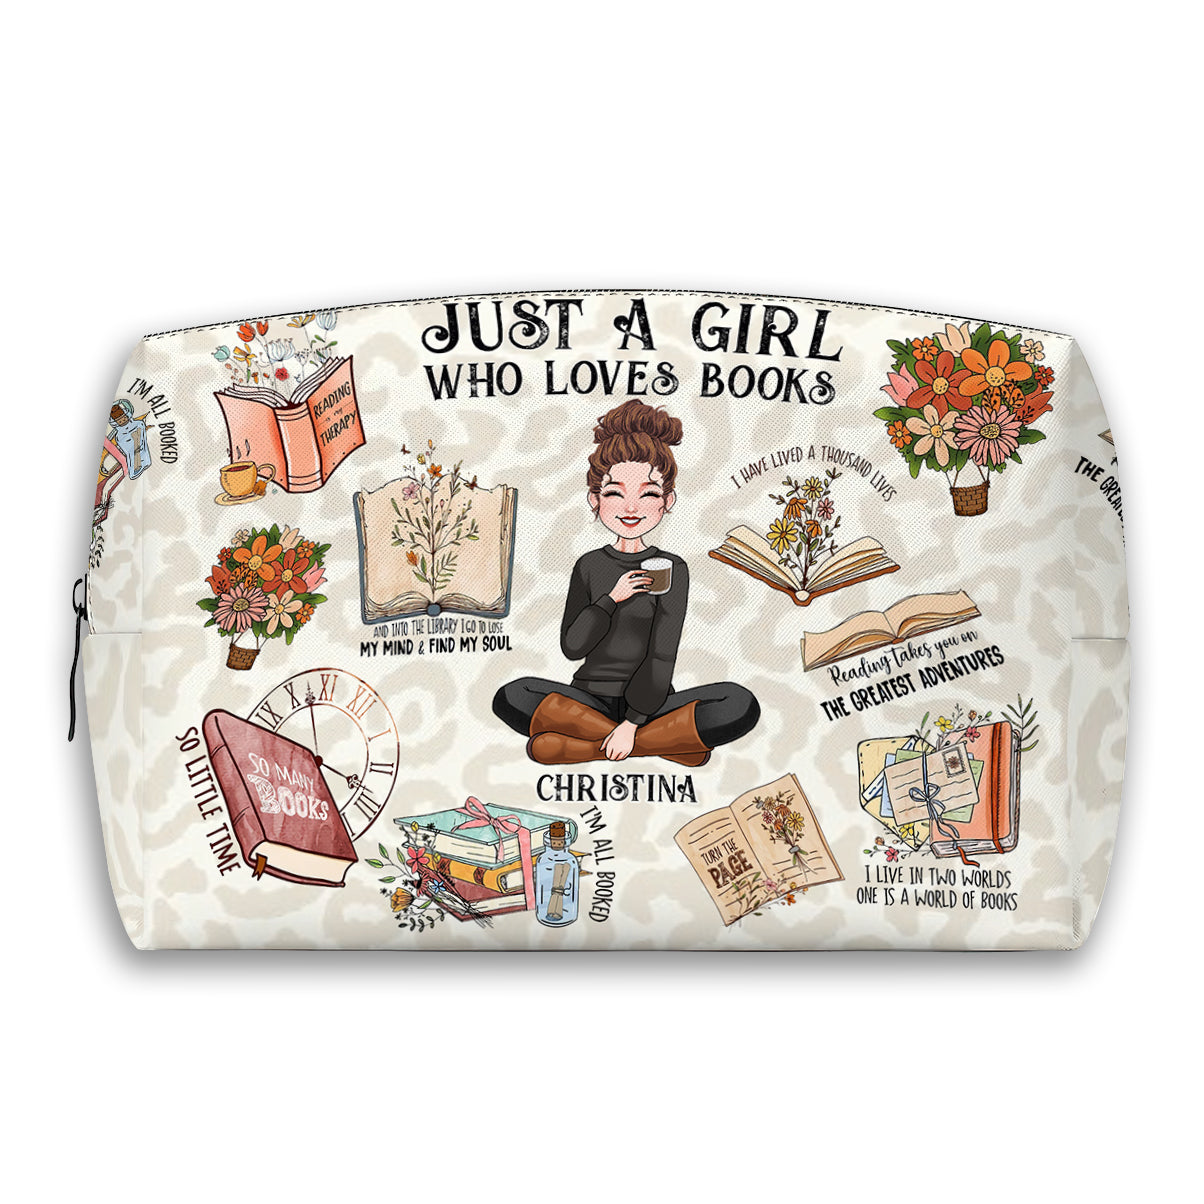 Just A Girl Who Loves Books - Personalized Book Makeup Bag